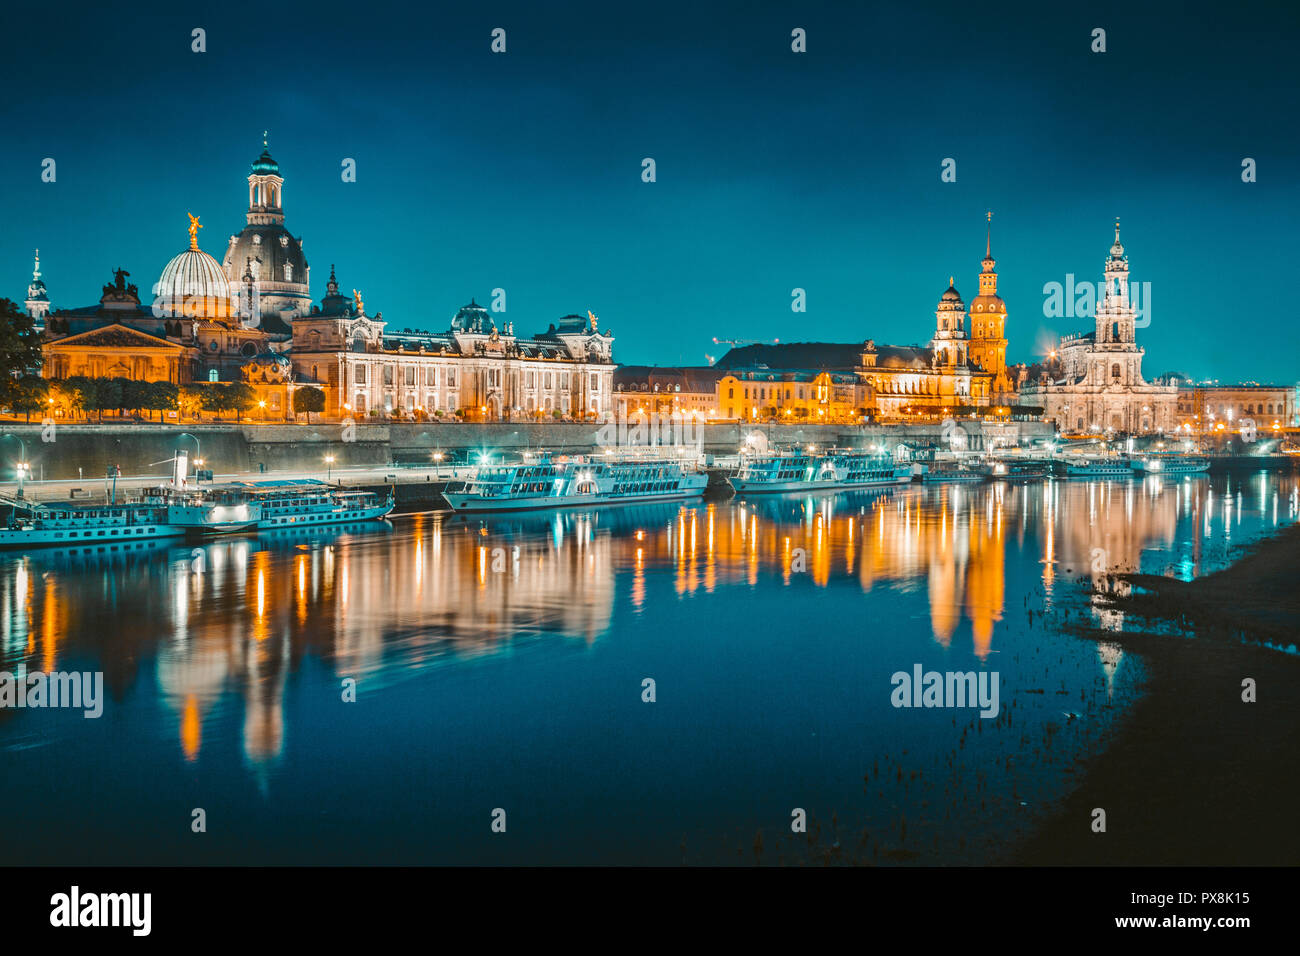 Classic twilight view of the historic city of Dresden reflecting in beautiful Elbe river during blue hour at dusk, Saxony, Germany. Stock Photo